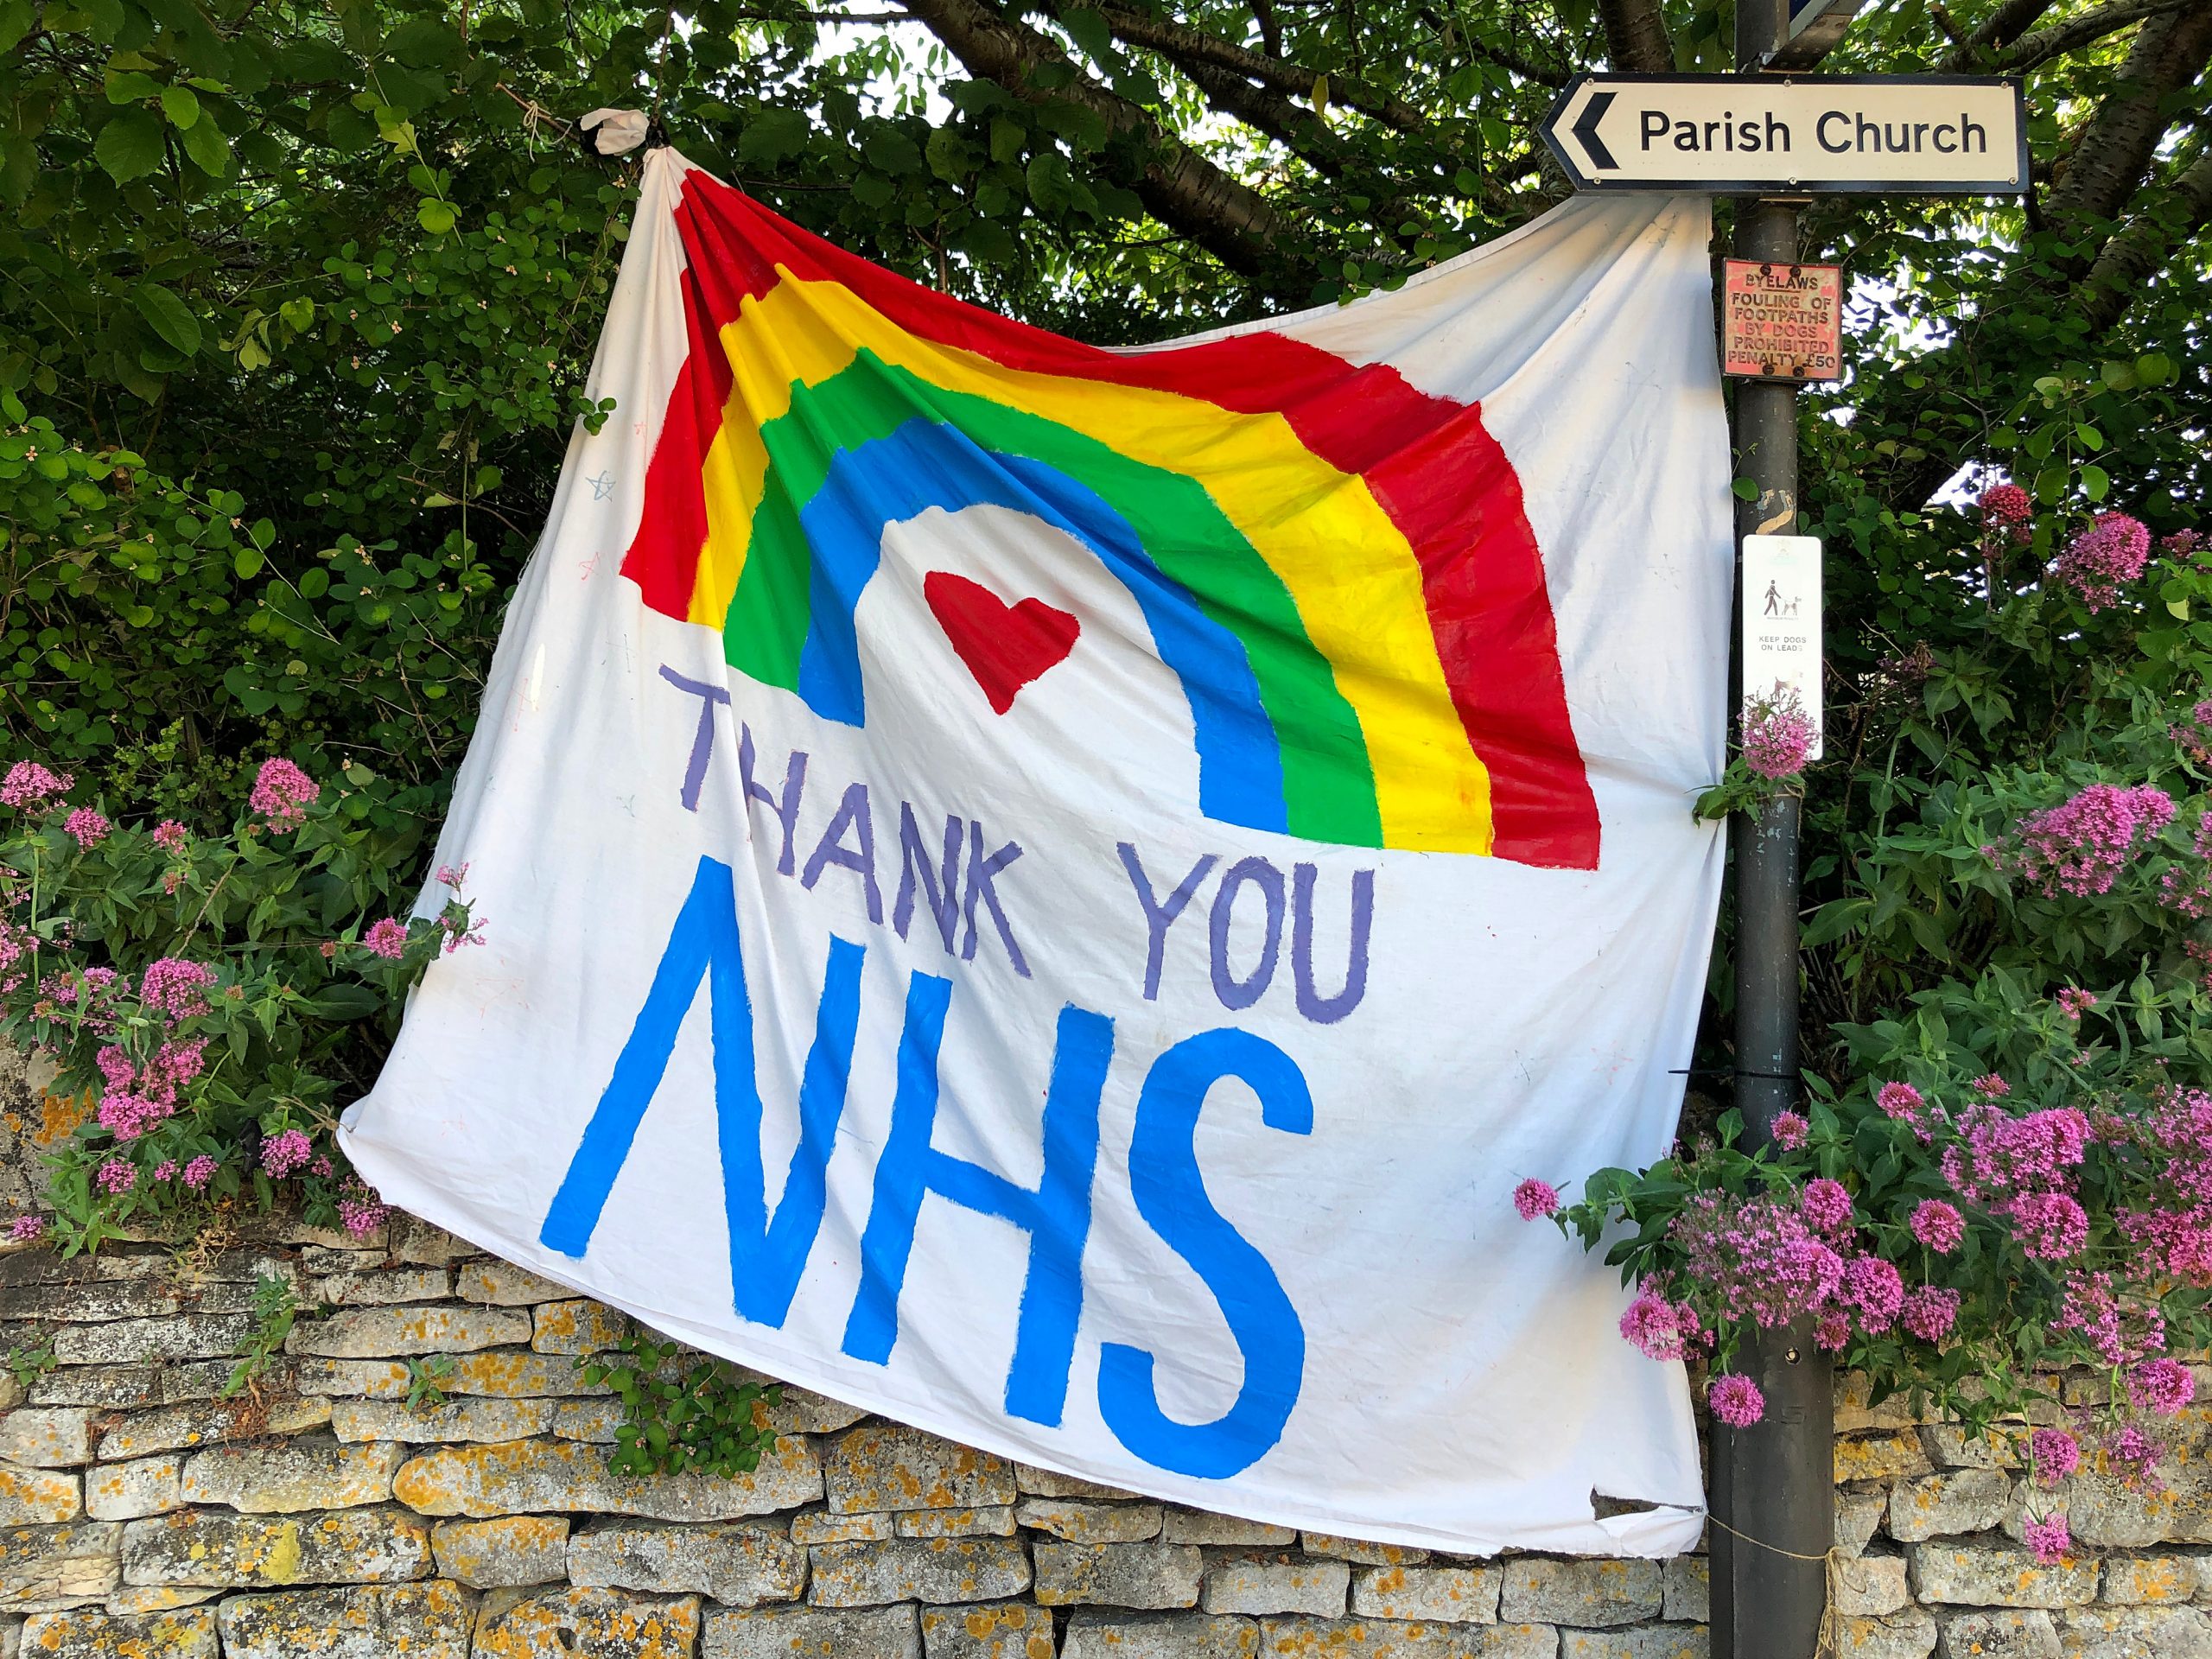 A piece of artwork that says 'Thank you NHS' with a rainbow over it.